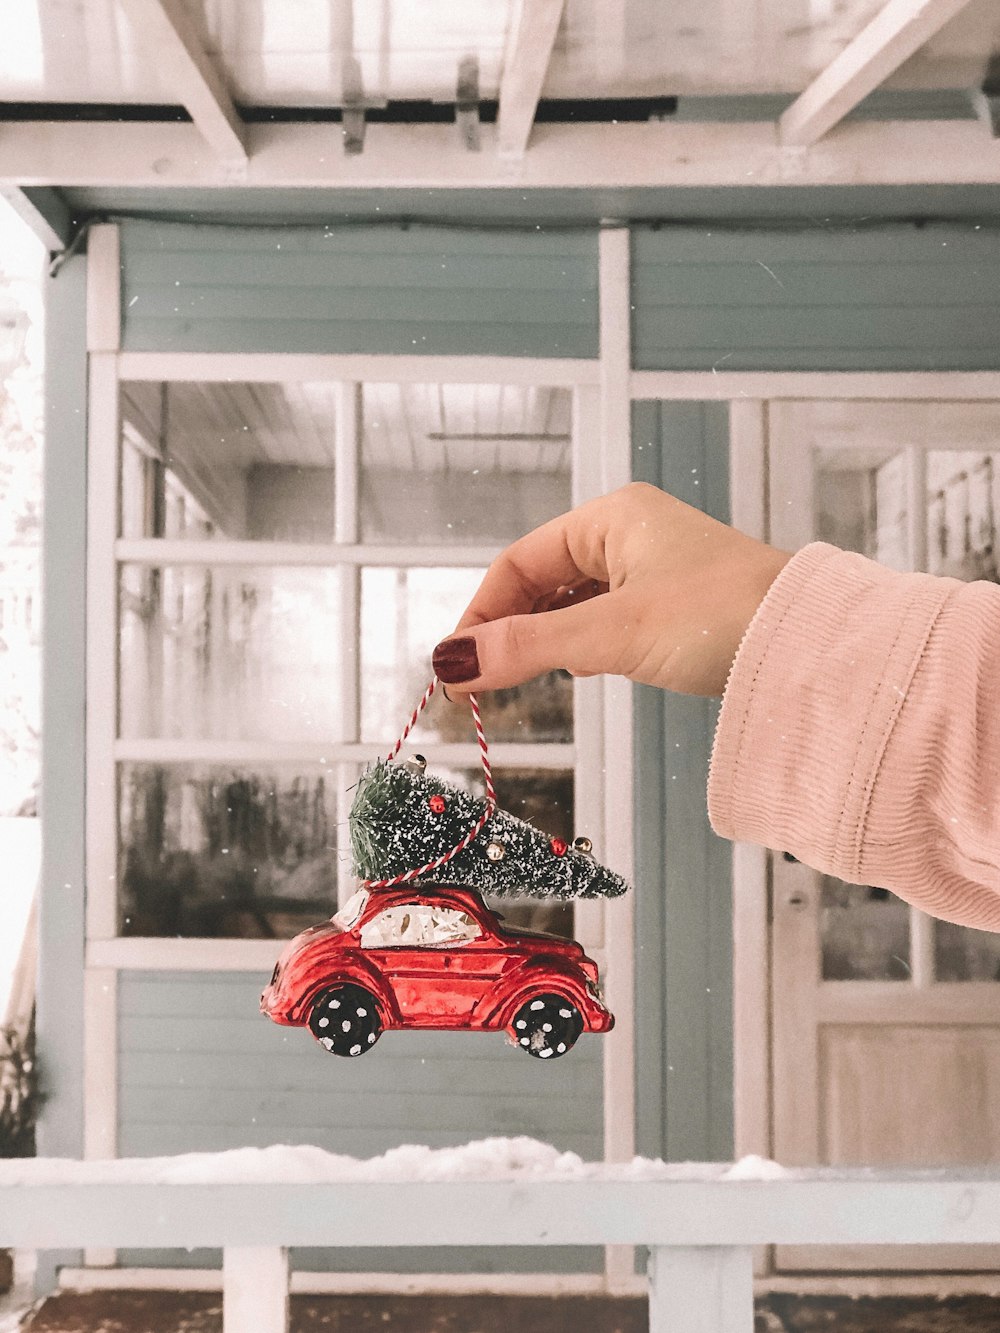 person holding red vehicle toy hanging decor